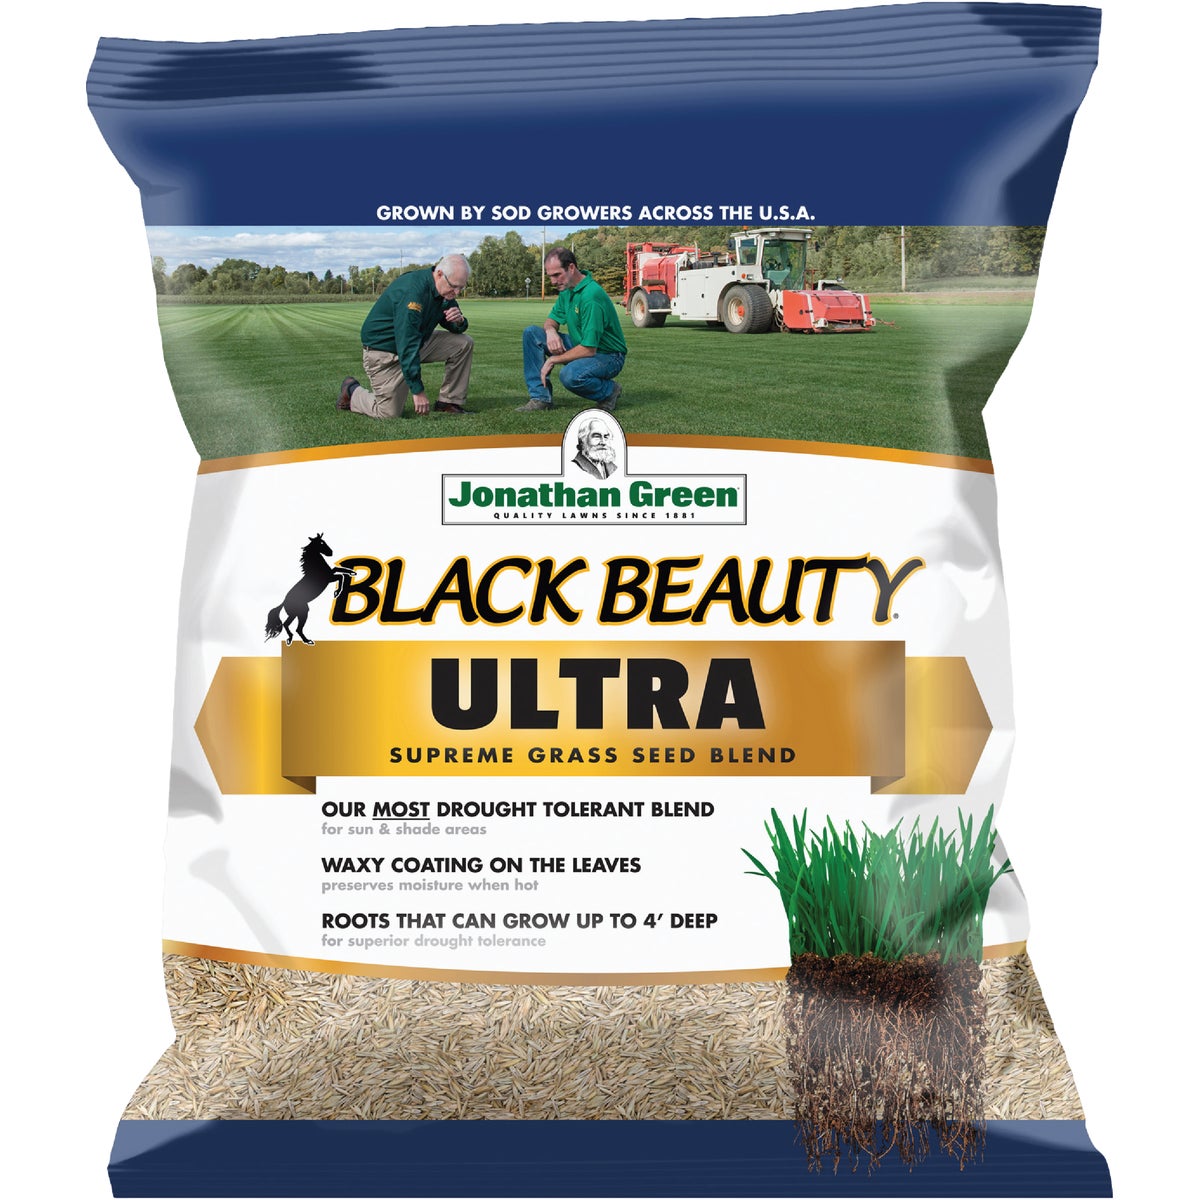 Item 702068, Germinates quickly and fills in damaged lawn areas.